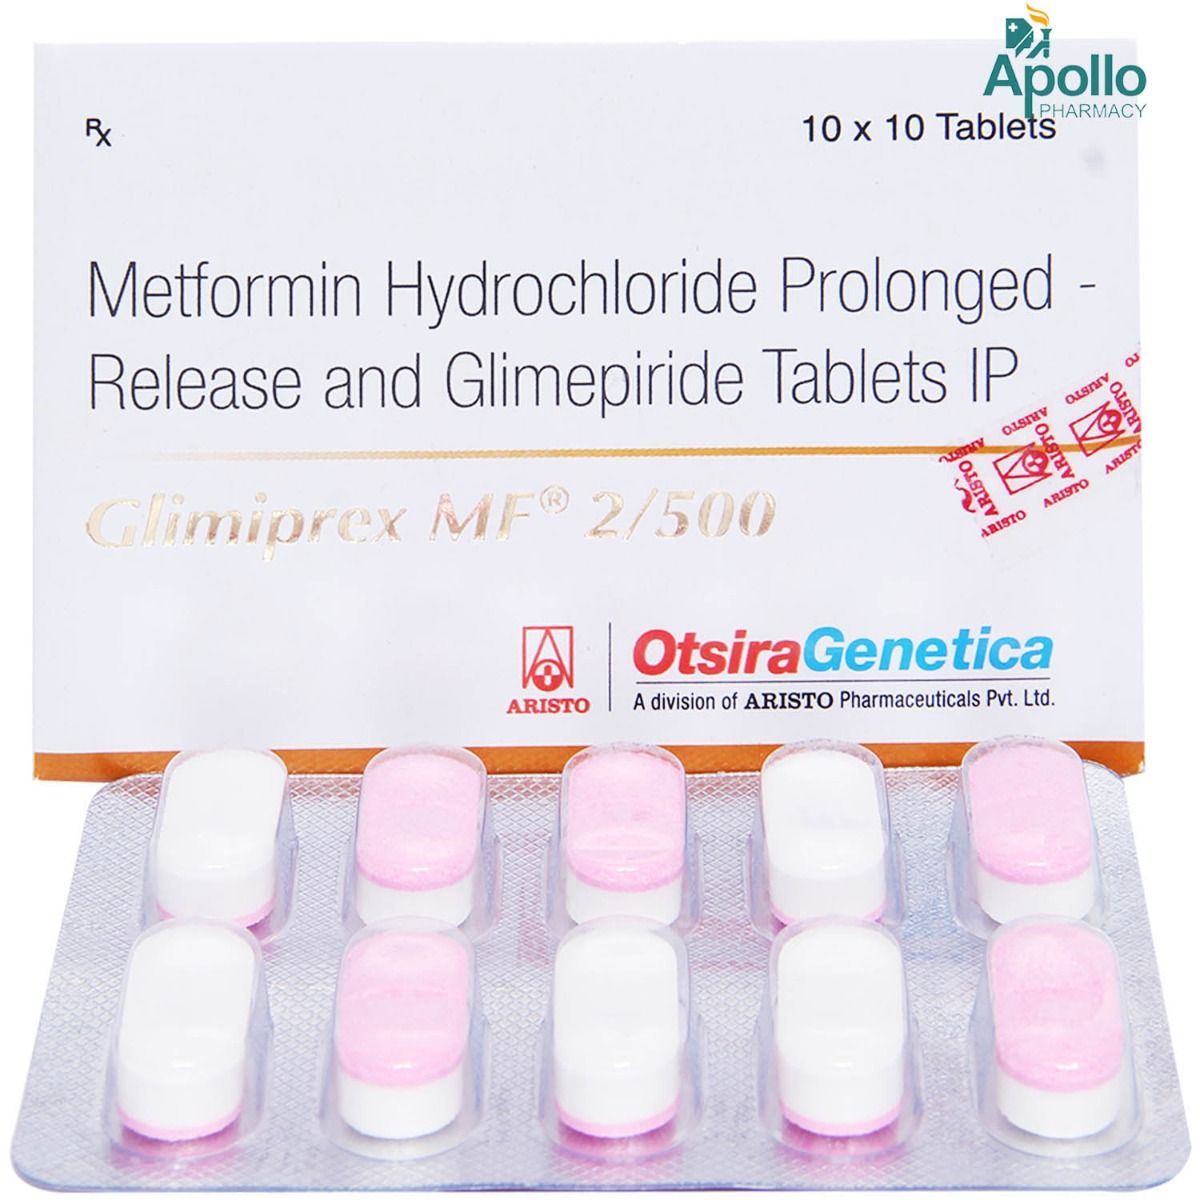 Glimiprex Mf 2 500 Tablet 10 S Price Uses Side Effects Composition Apollo Pharmacy